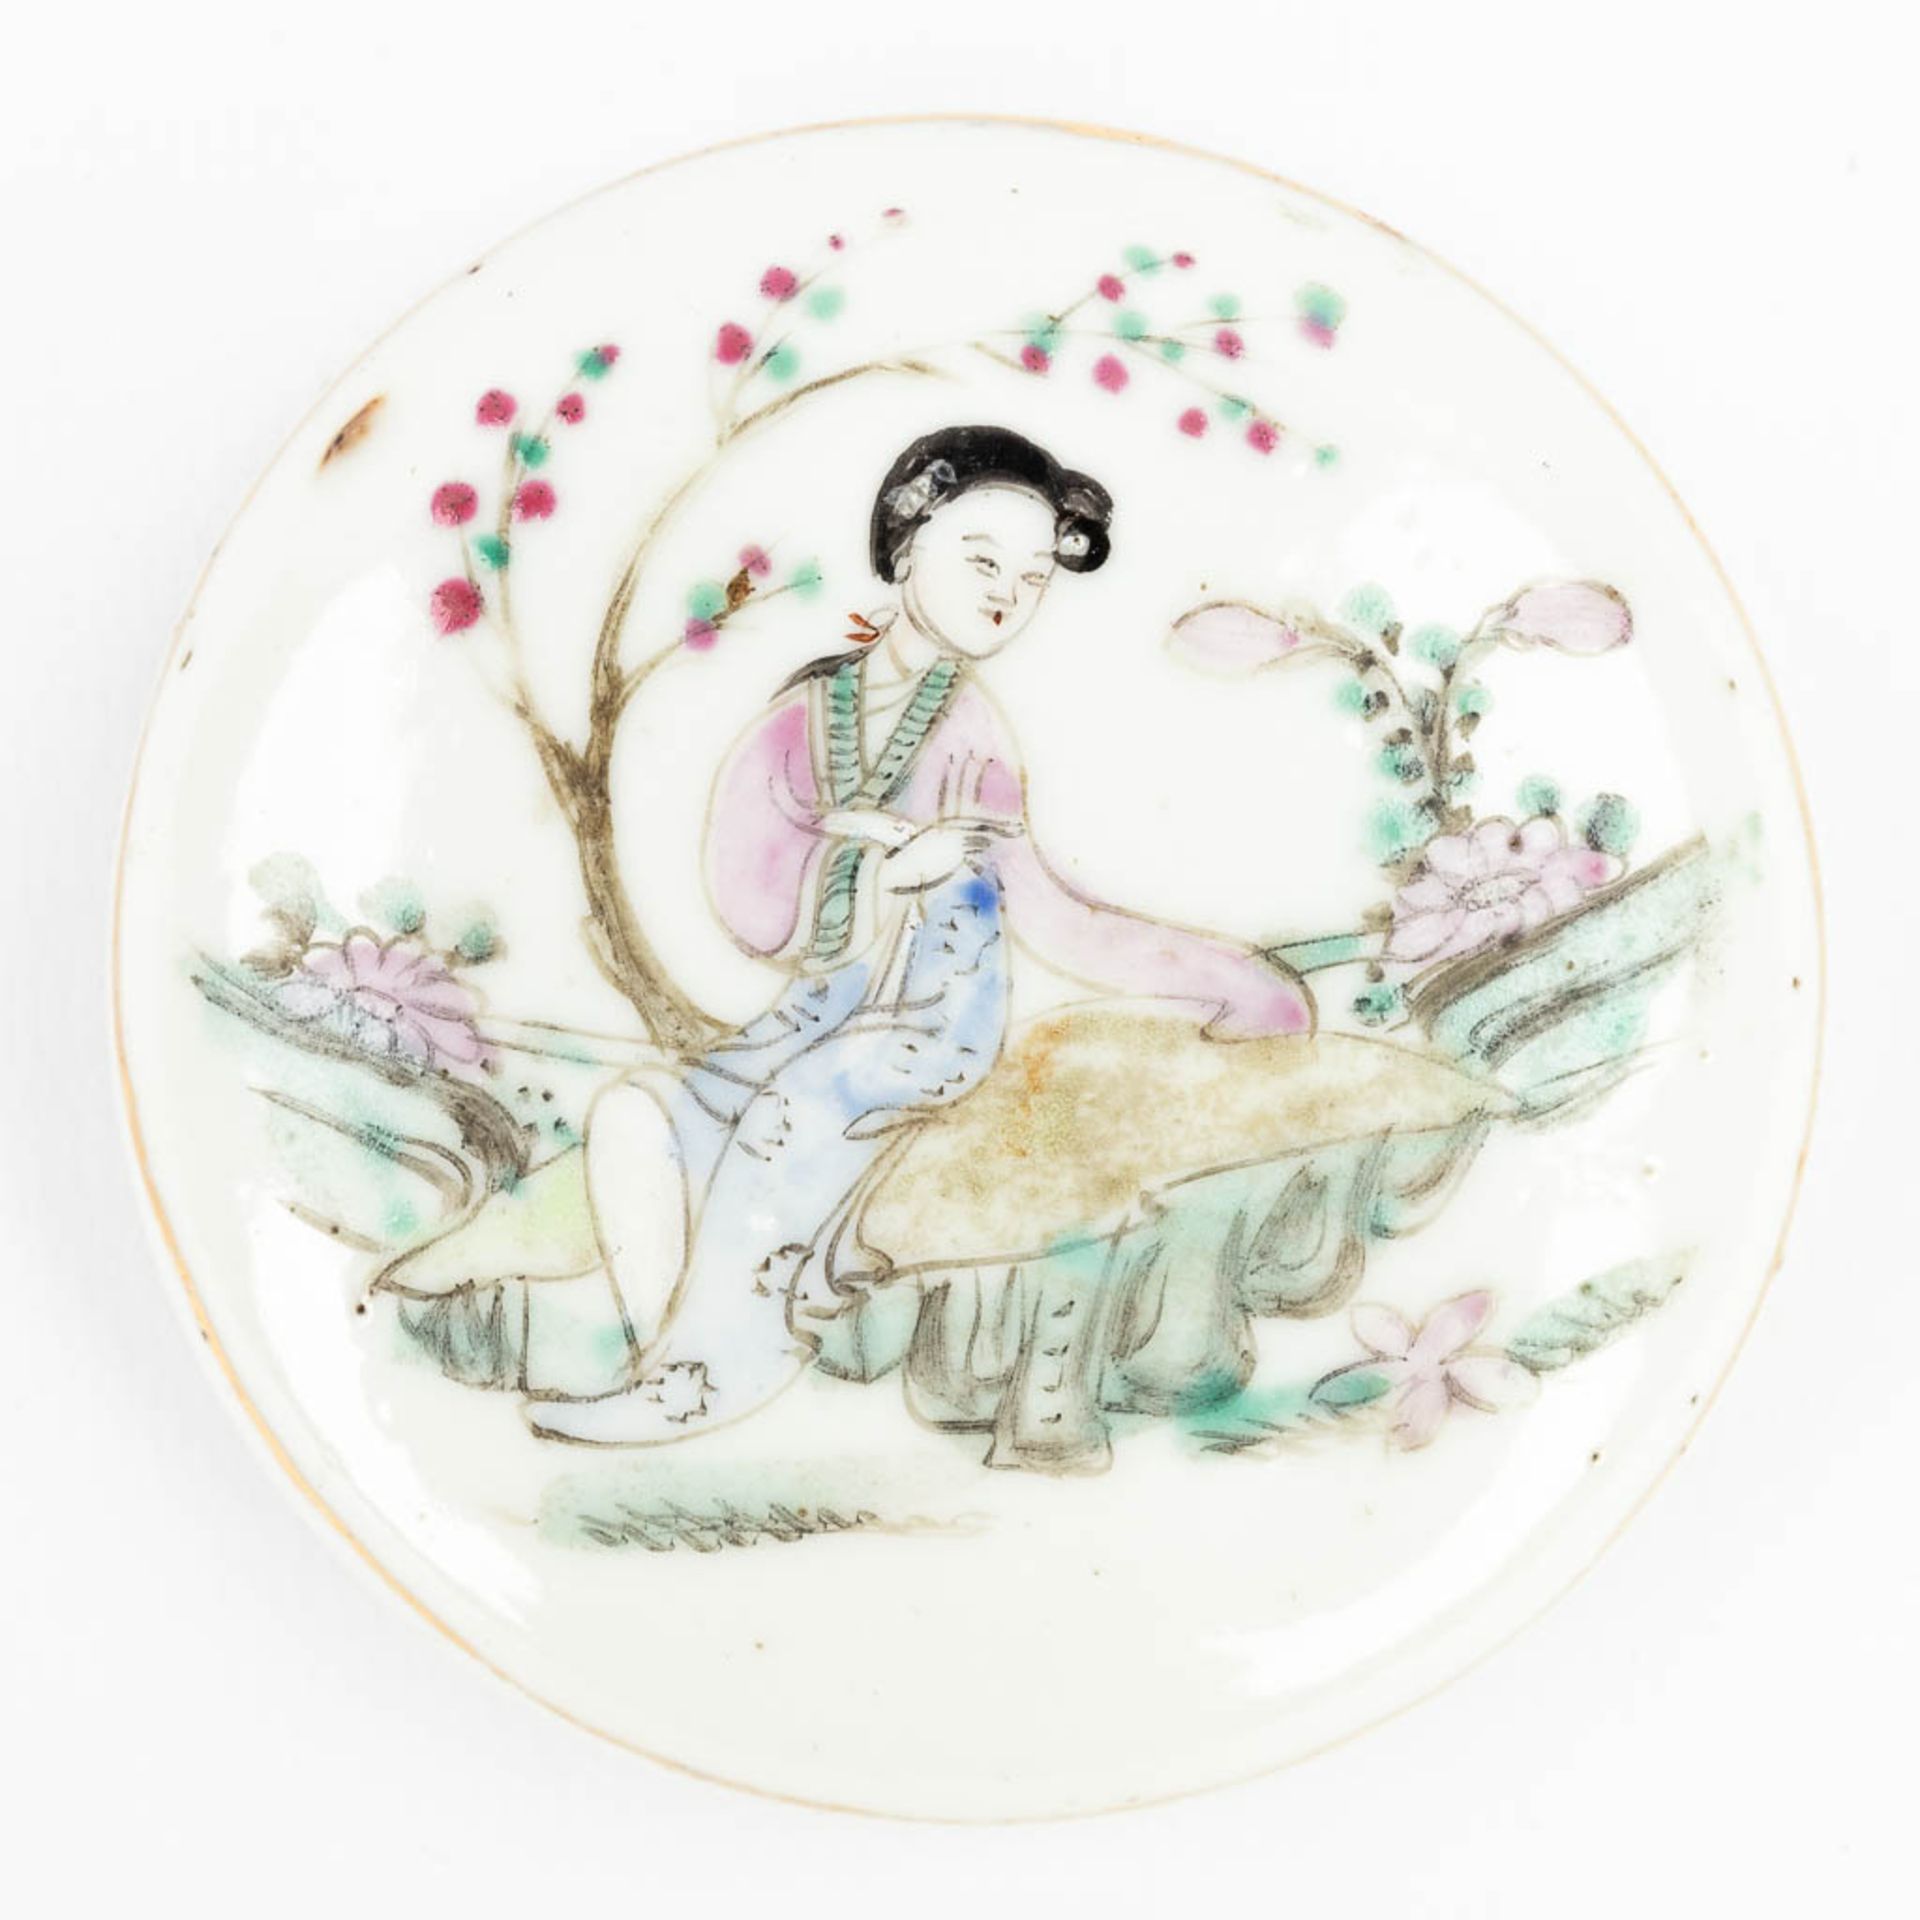 AÊset of 2 Chinese pots with lid, with hand-painted decor and made of porcelain (5 x 8,5 cm) - Image 11 of 18